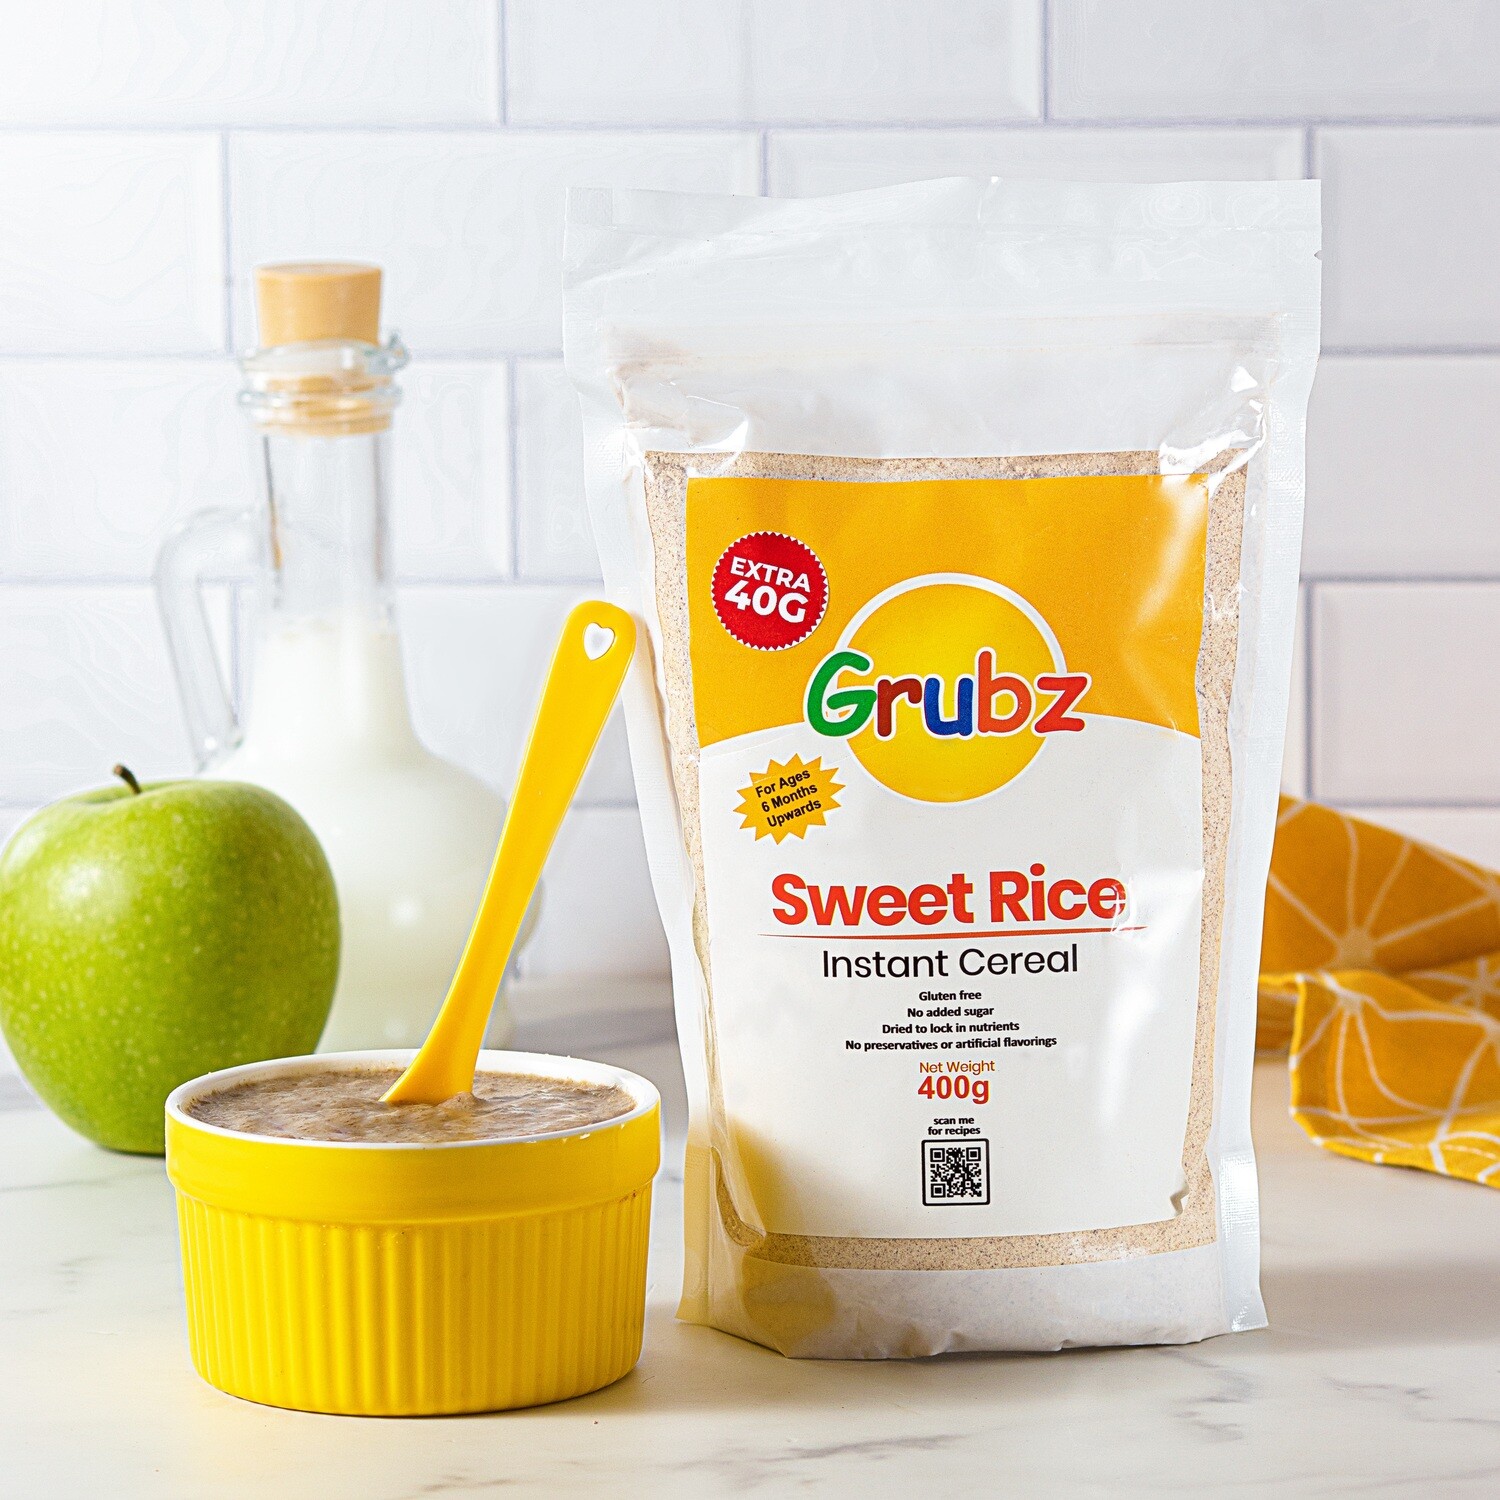 Grubz Sweet Rice Instant Cereal